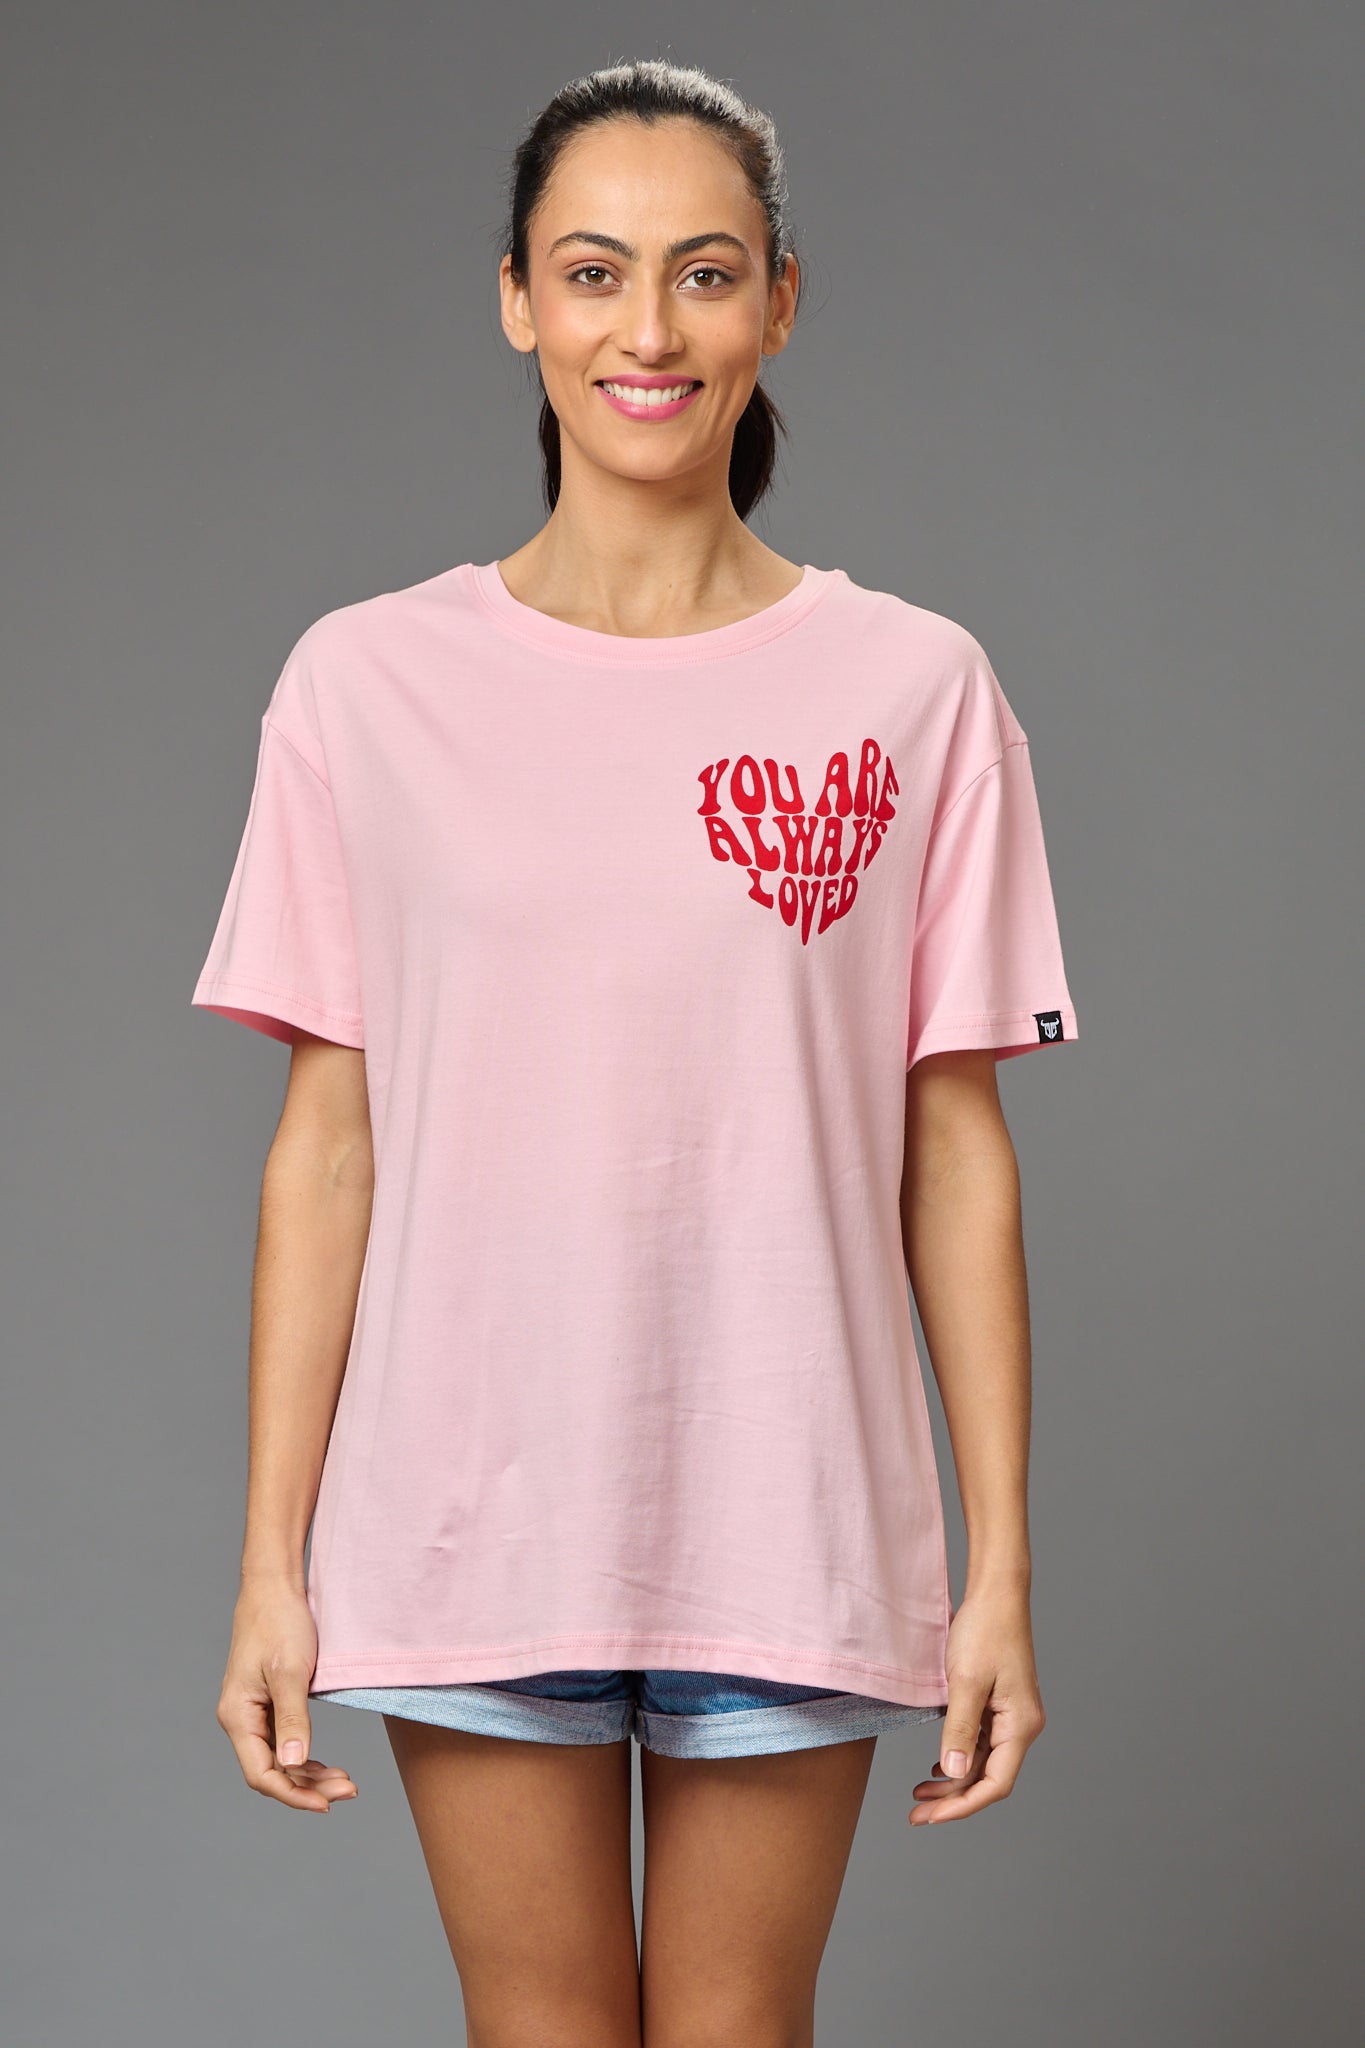 You are Always Loved Printed Baby Pink Oversized T-Shirt for Women - Go Devil